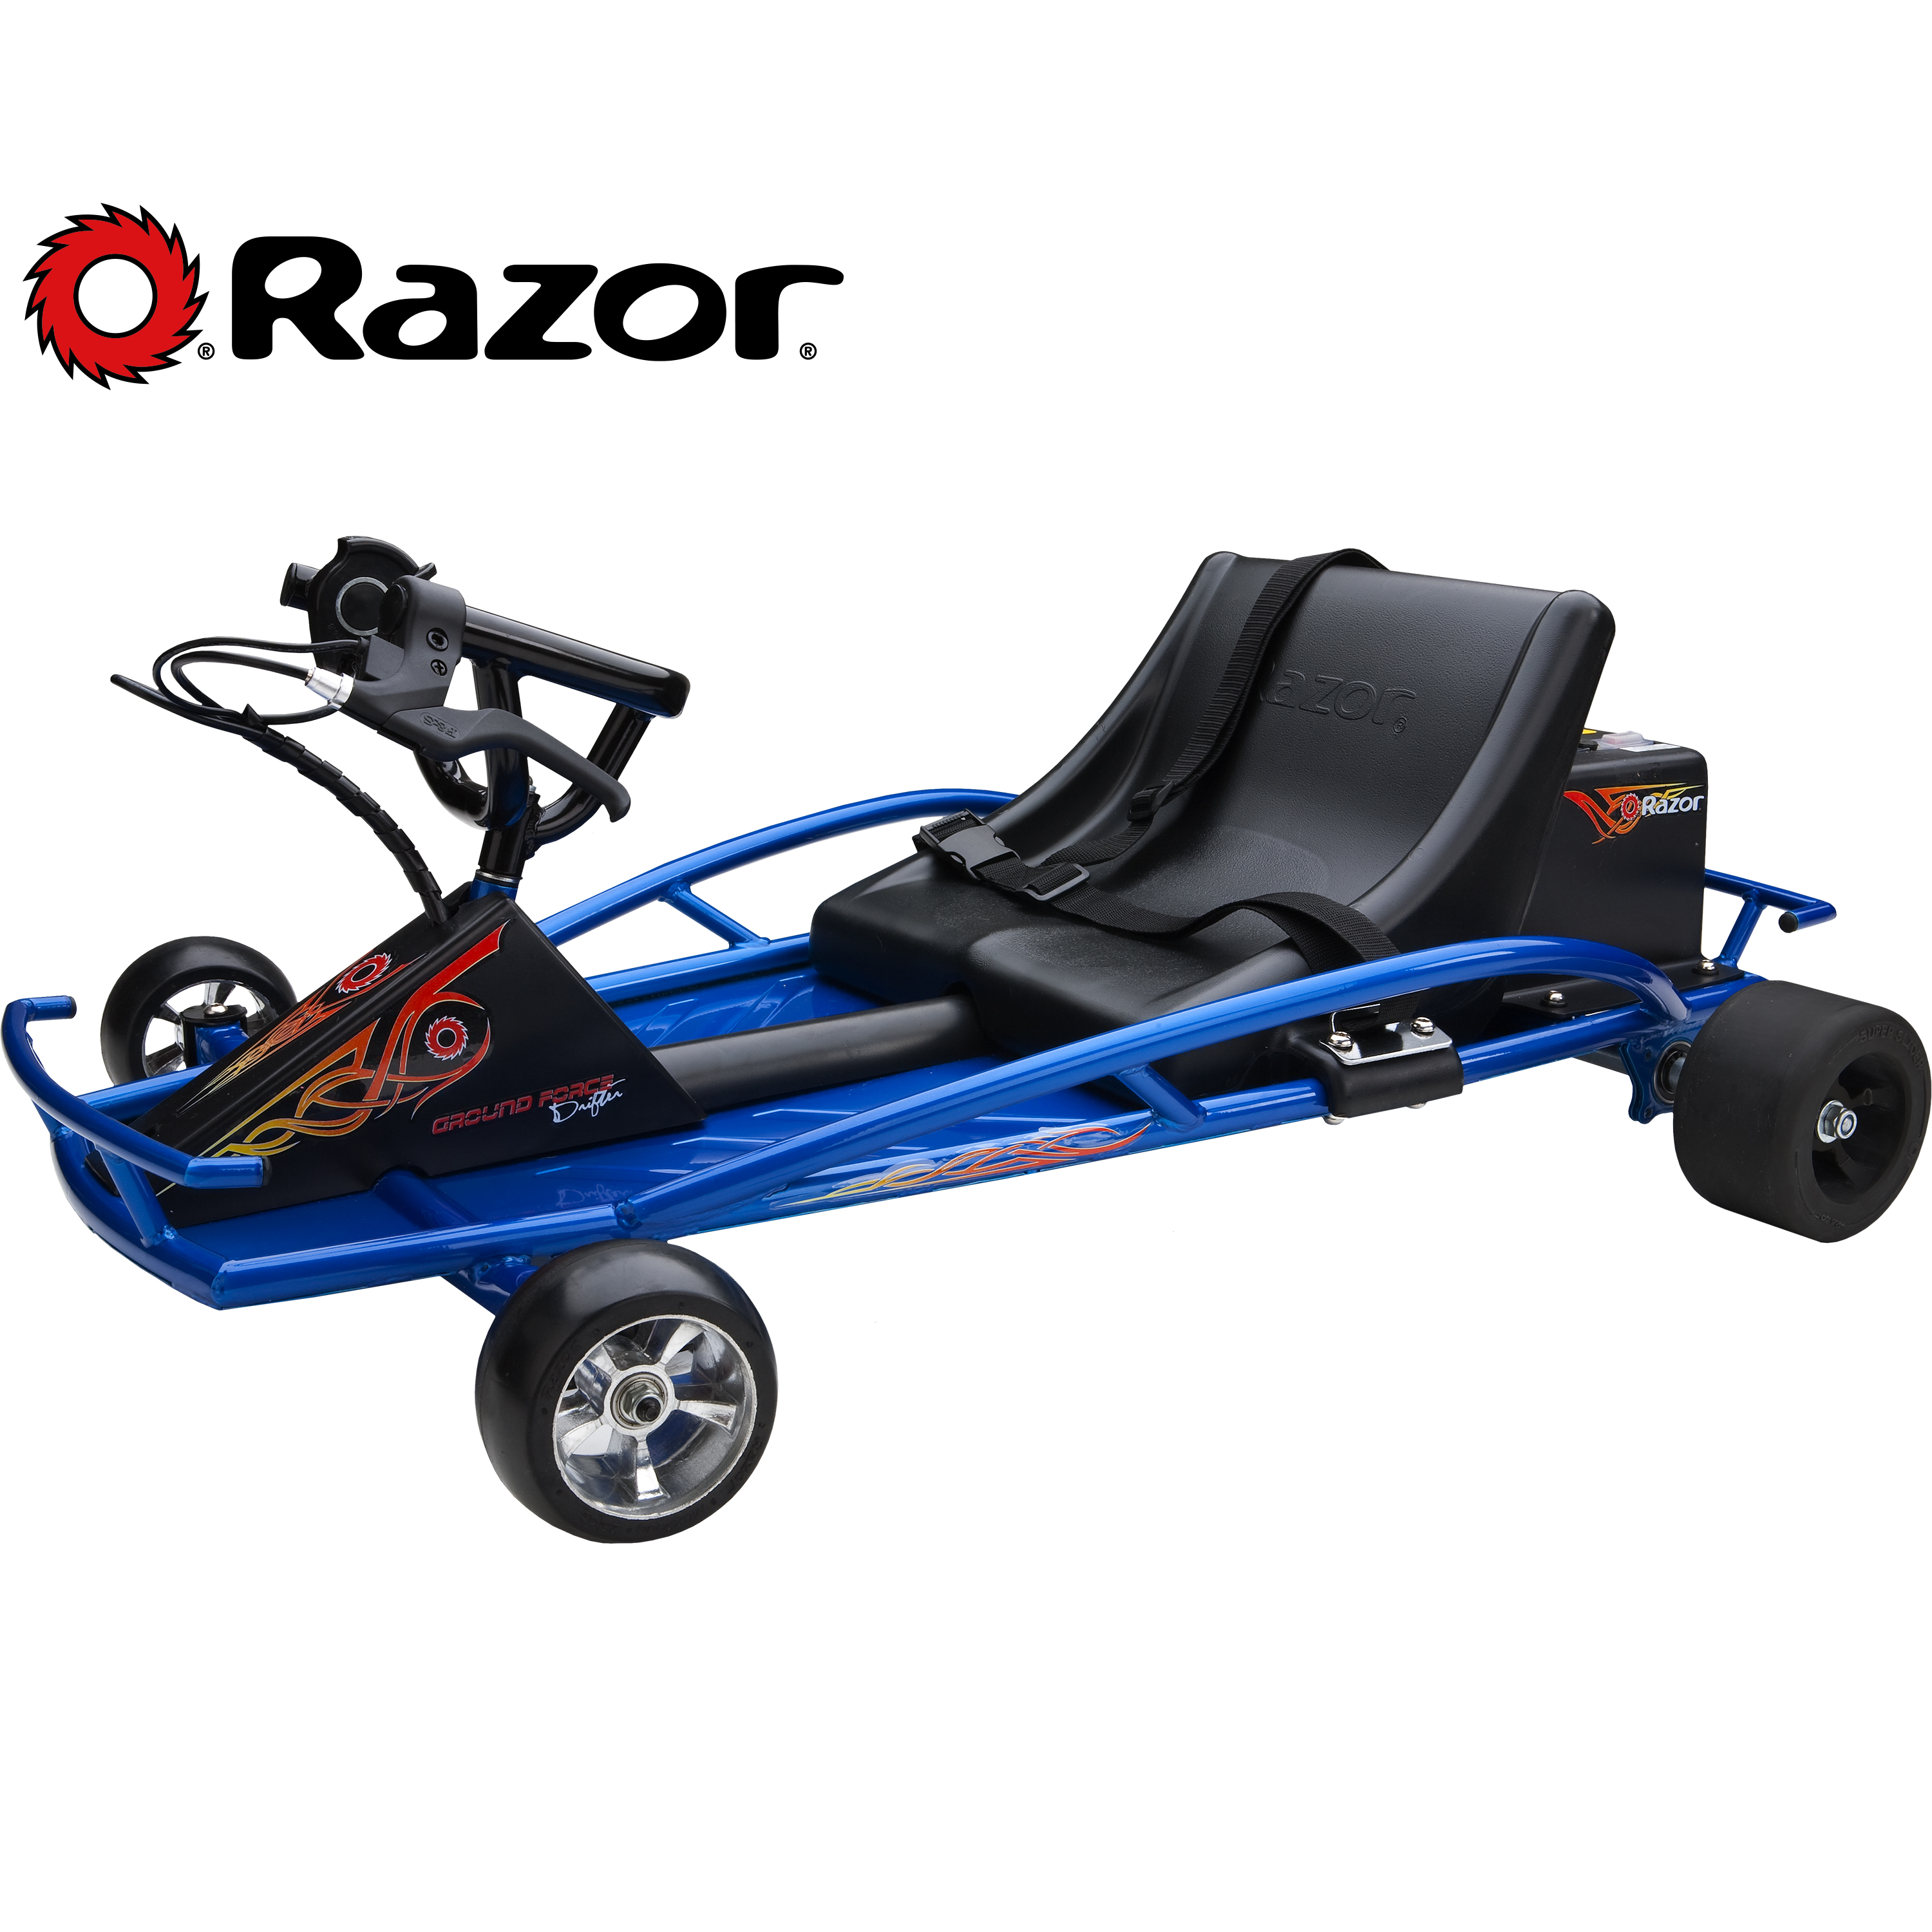 Razor Authentic Electric Powered Ground Force Drifter- Go Kart - image 5 of 8